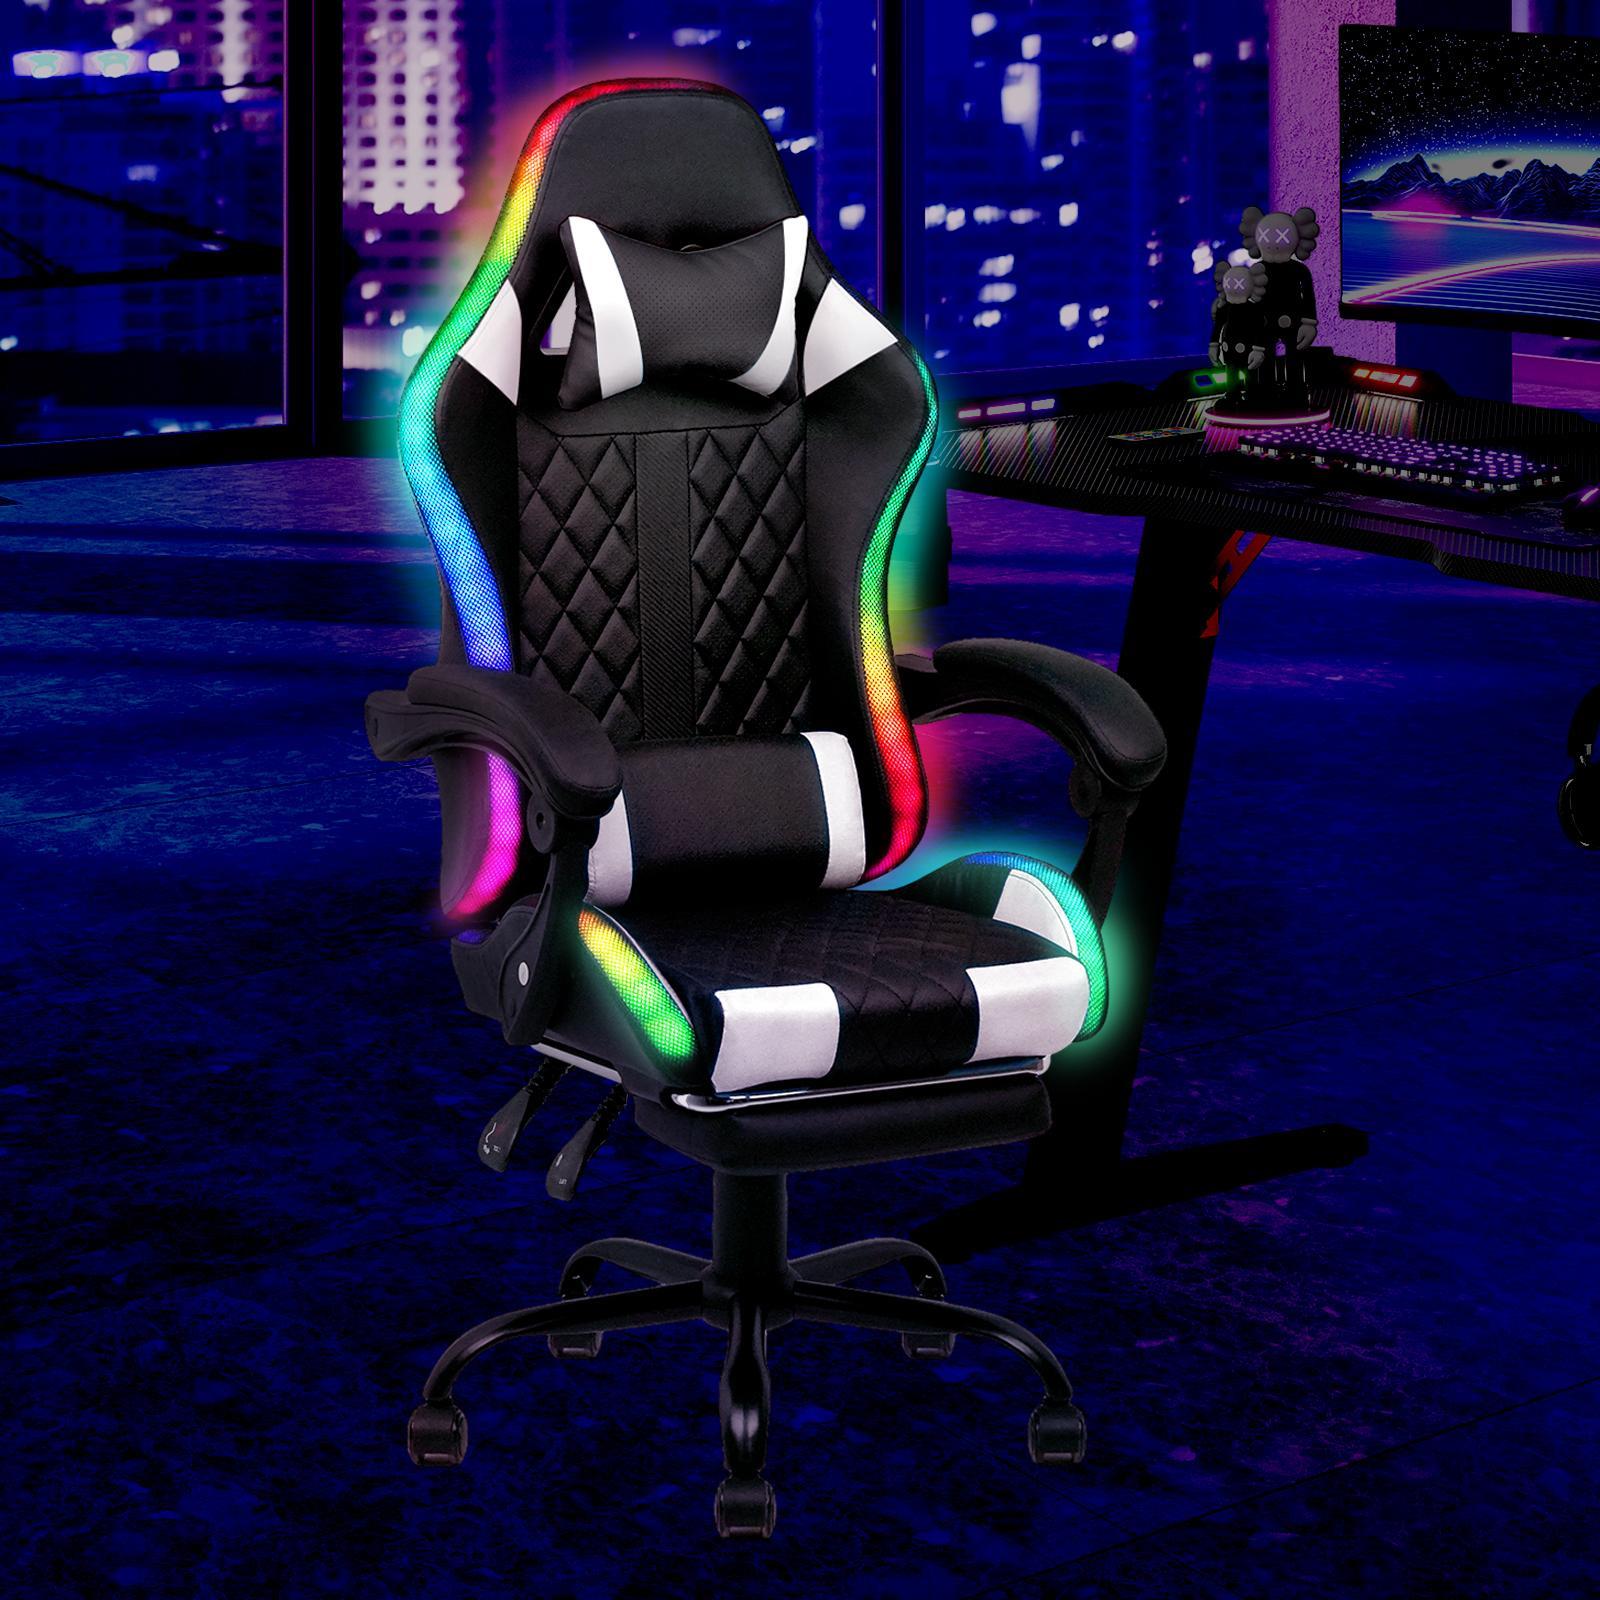 Advwin Gaming Chair with 7 Massagers and 12 RGB LED Lights w/ Footrest Black & White